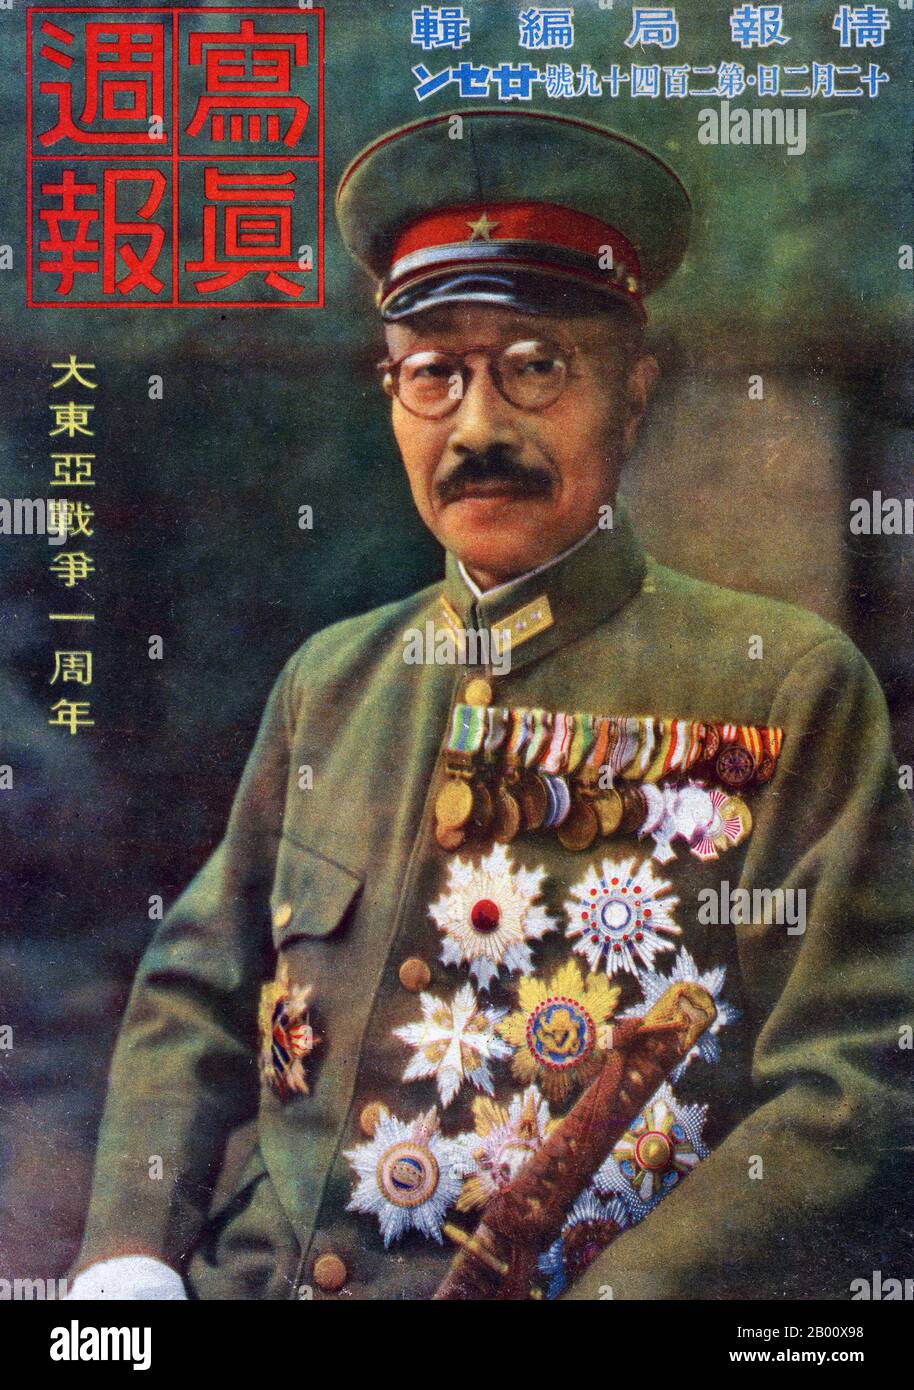 Japan: Hideki Tojo (1884-1948), Prime Minister of Japan 18 October 1941 – 22 July 1944.  Hideki Tojo (30 December 1884 – 23 December 1948) was a general in the Imperial Japanese Army (IJA) and the 40th Prime Minister of Japan during much of World War II, from 18 October 1941 to 22 July 1944. Some historians hold him responsible for the attack on Pearl Harbor, which led to America entering World War II. After the end of the war, Tojo was sentenced to death for war crimes by the International Military Tribunal for the Far East and hanged on 23 December 1948. Stock Photo